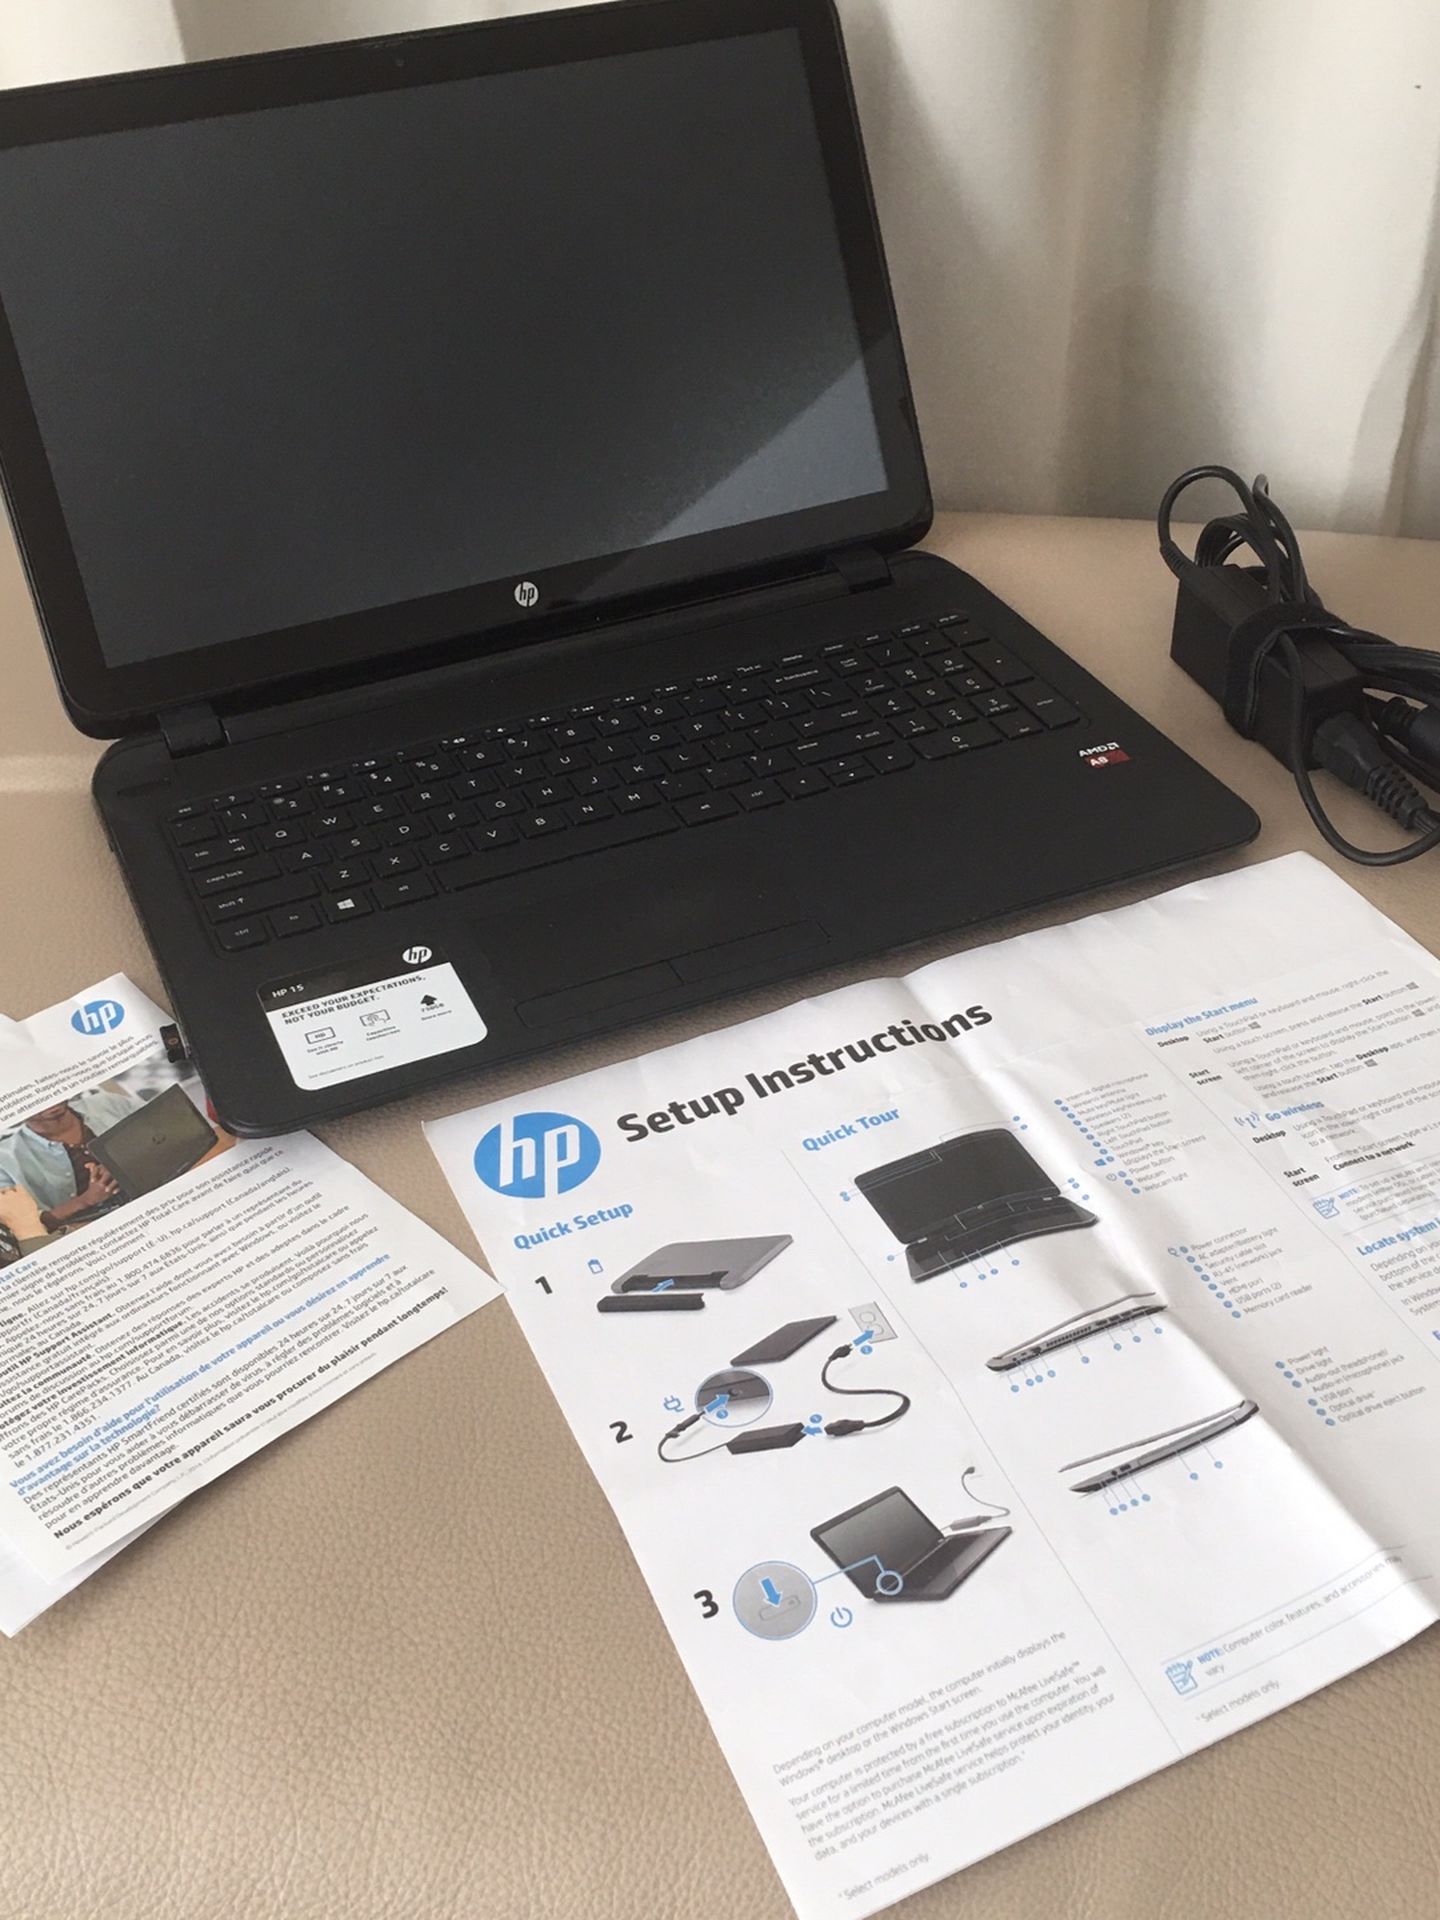 HP 15-f111dx Laptop with Touchscreen, AMD A8 CPU, 8GB RAM, 750GB HDD